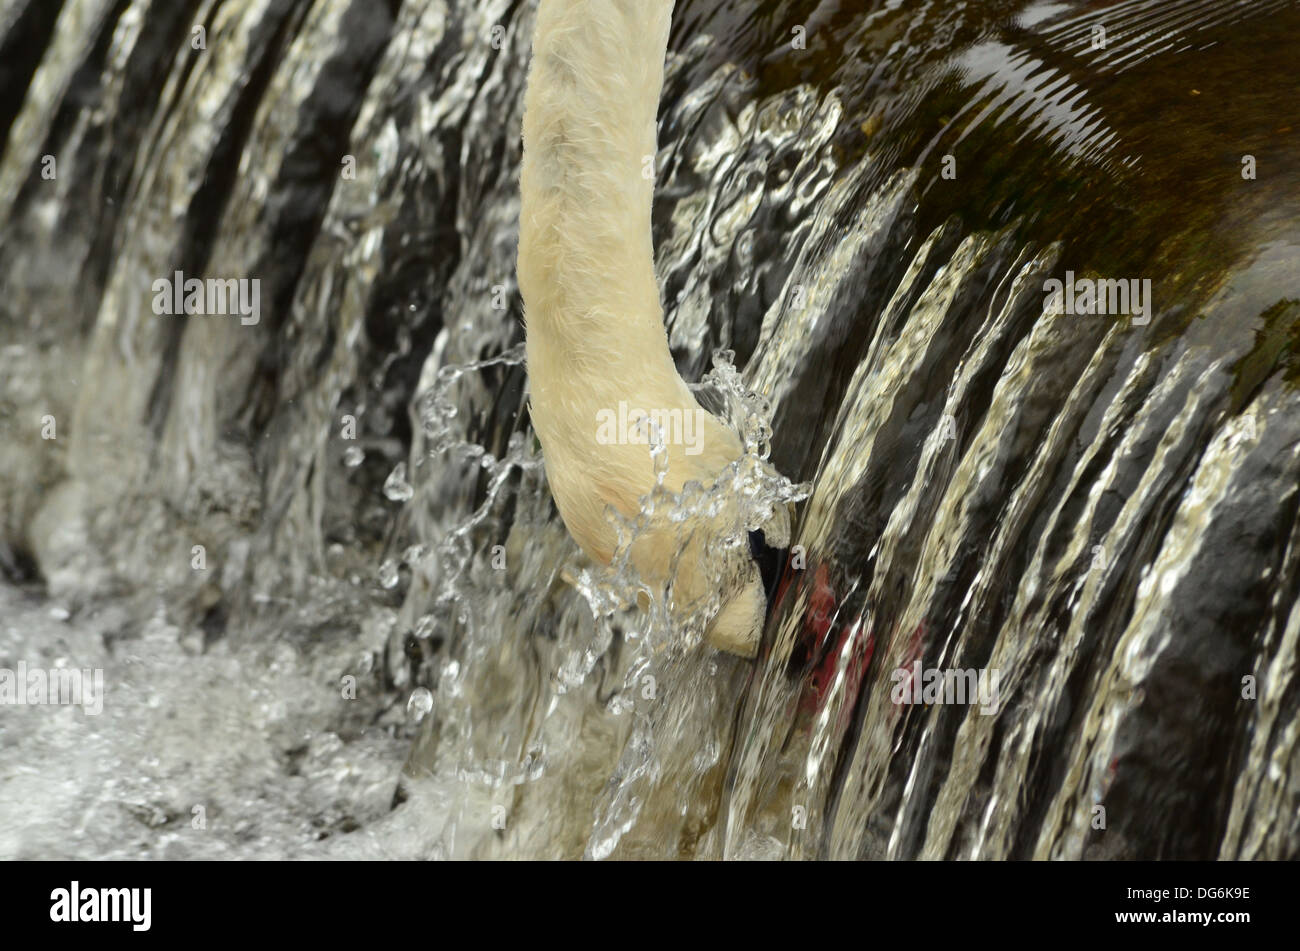 Swan feeding at a weir with head immersed under water Stock Photo